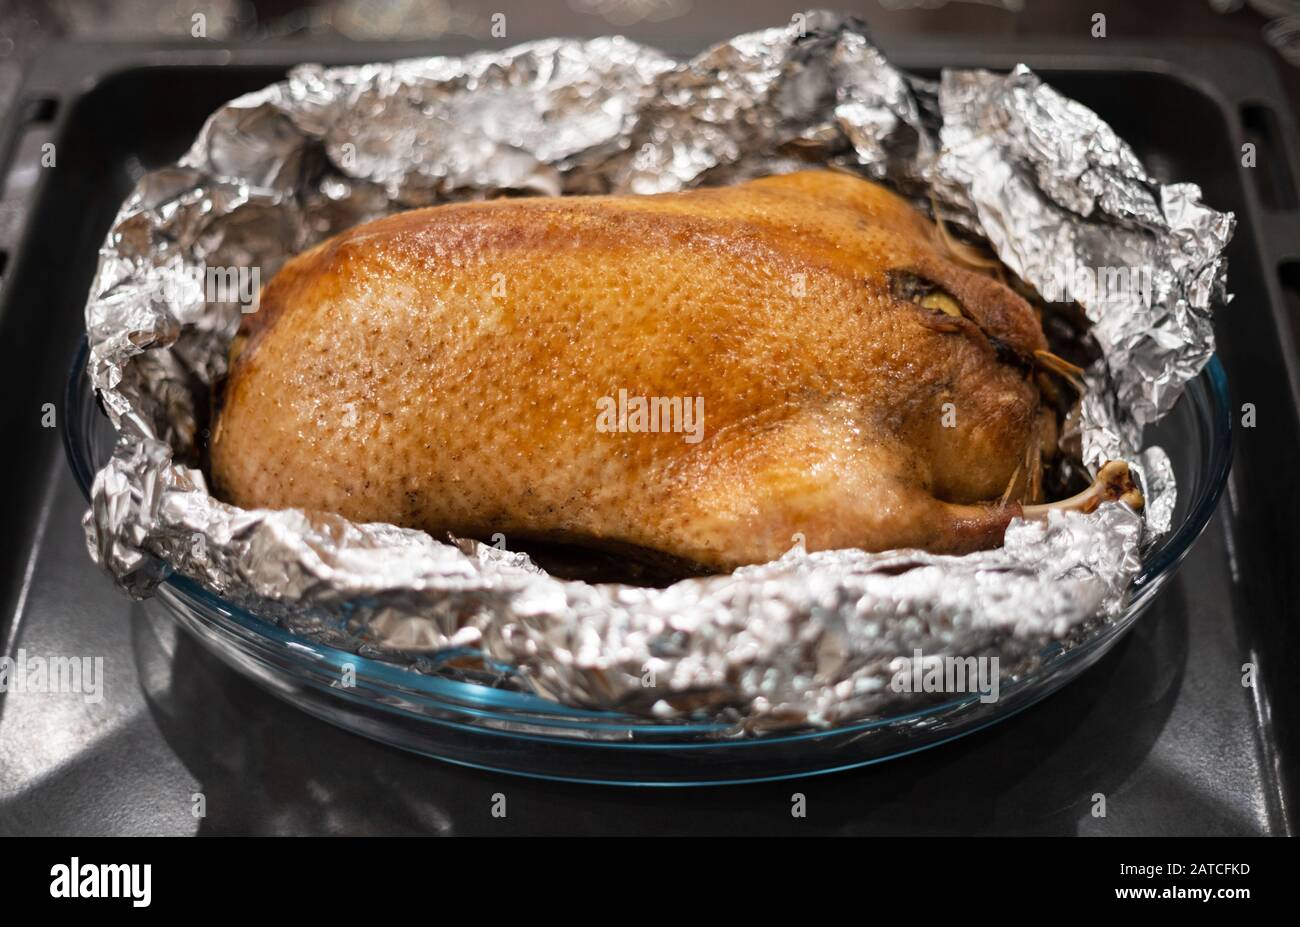 Food in foil. Duck with apples baked in foil on a tray. Delicious poultry meat with a golden crust. Side view. Stock Photo